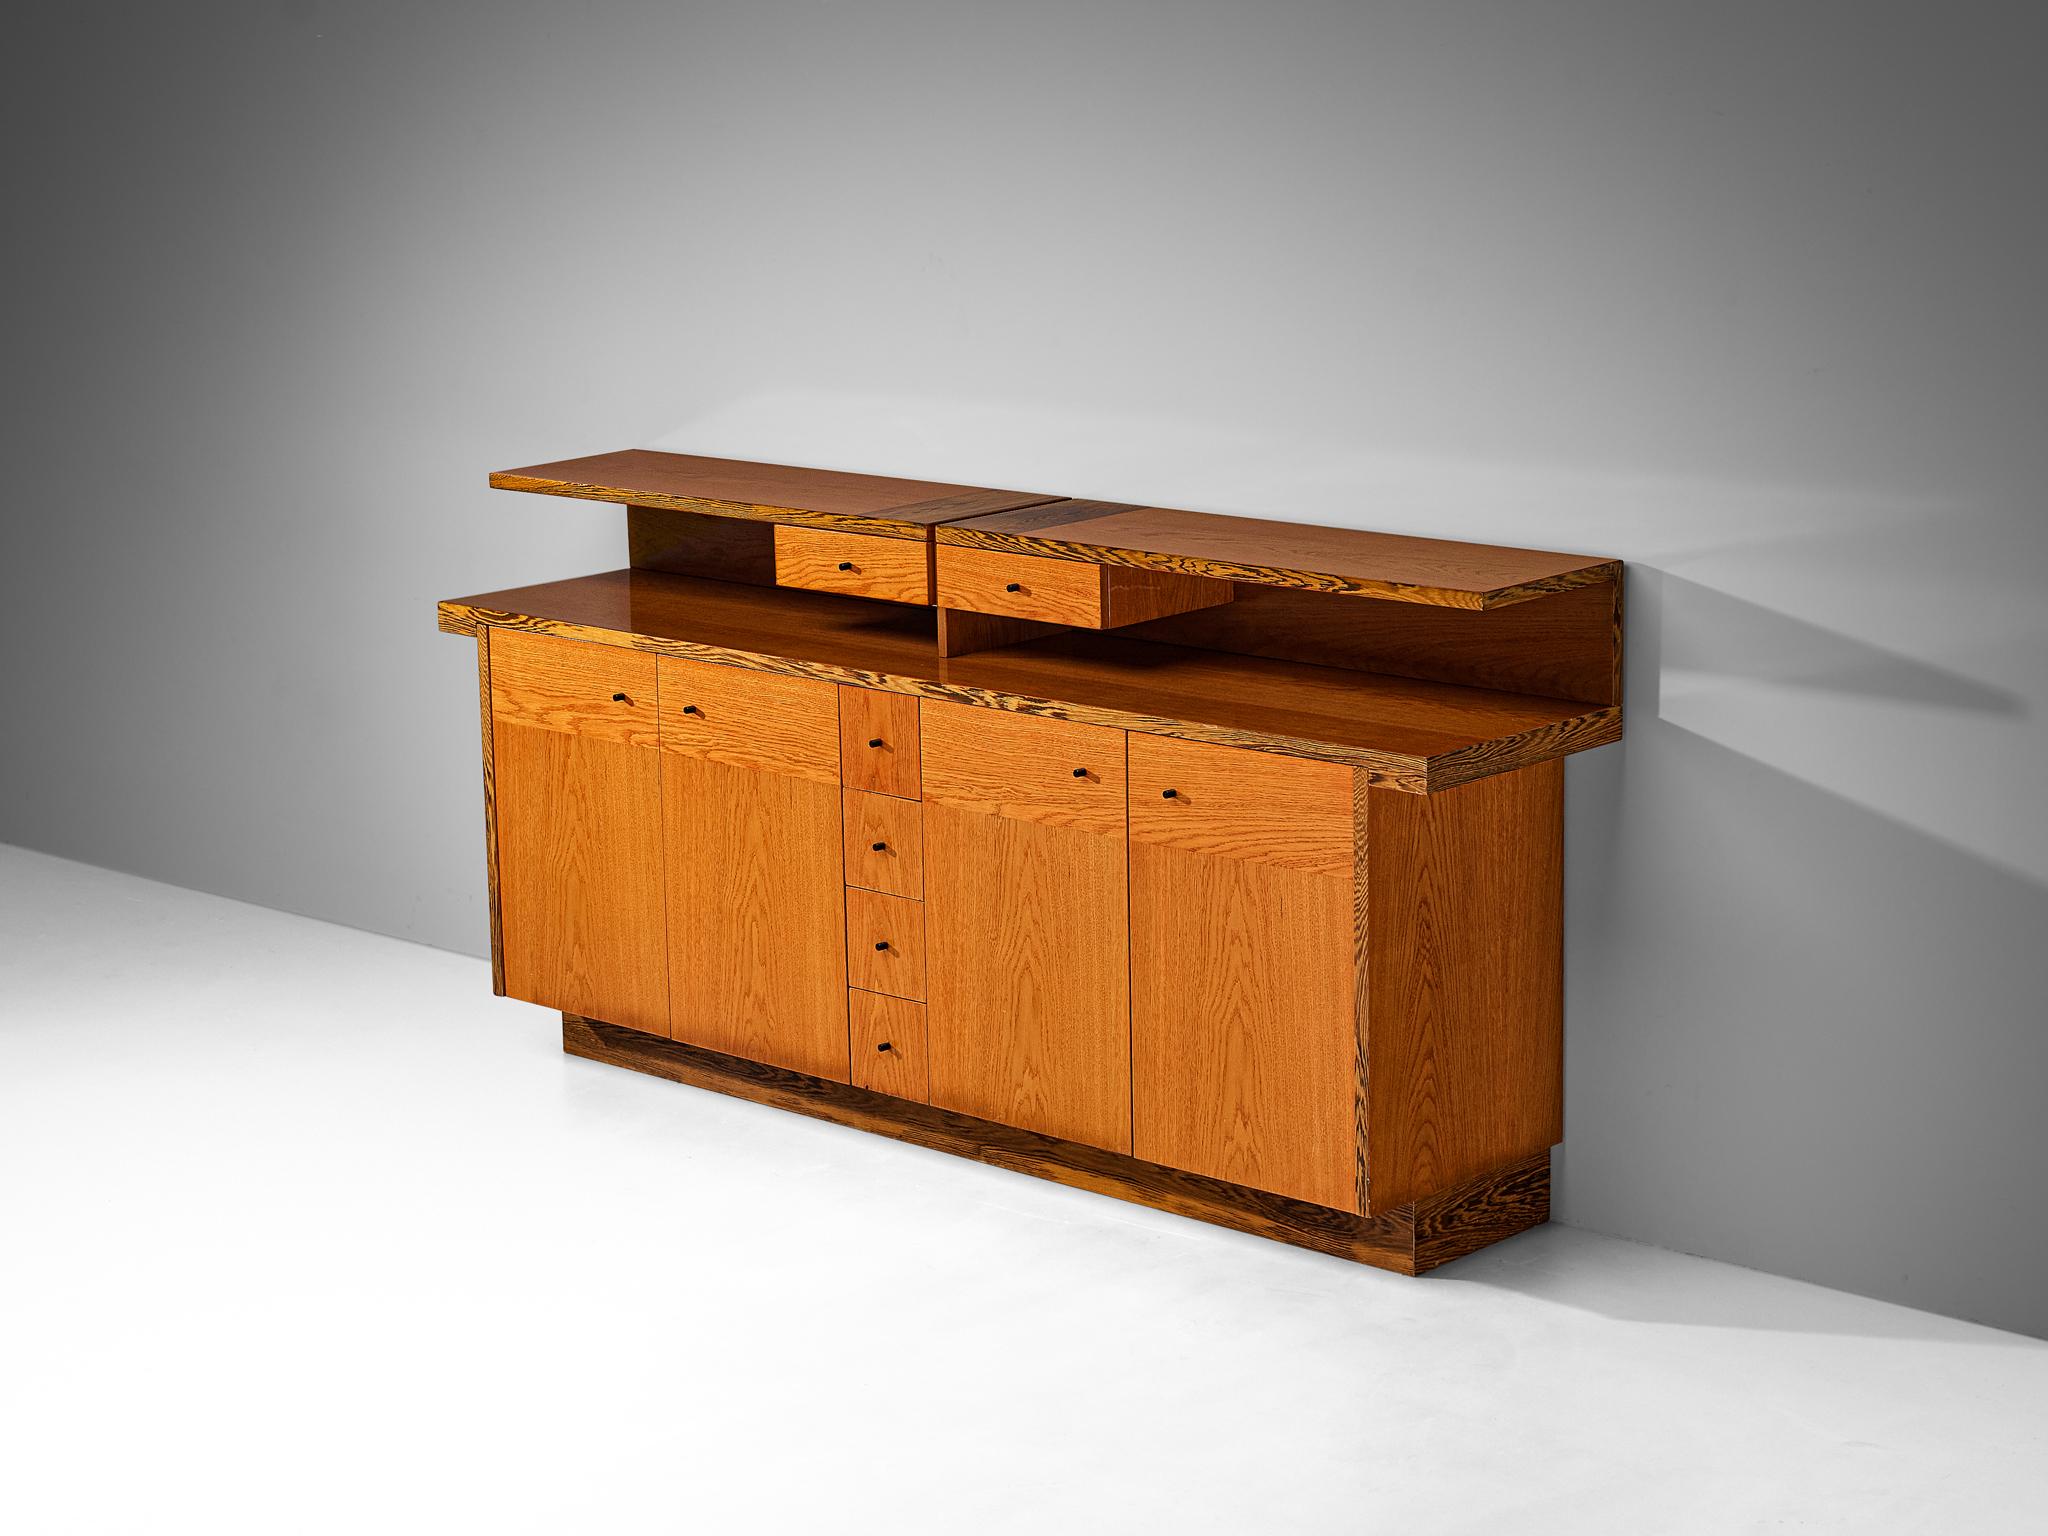 Sideboard, wengé veneer, ash veneer, Italy, 1970s.

This exquisite credenza exemplifies the aesthetic sensibilities that prevailed during the 1970s. The front facade features a captivating interplay of geometric shapes arranged in a symmetrical